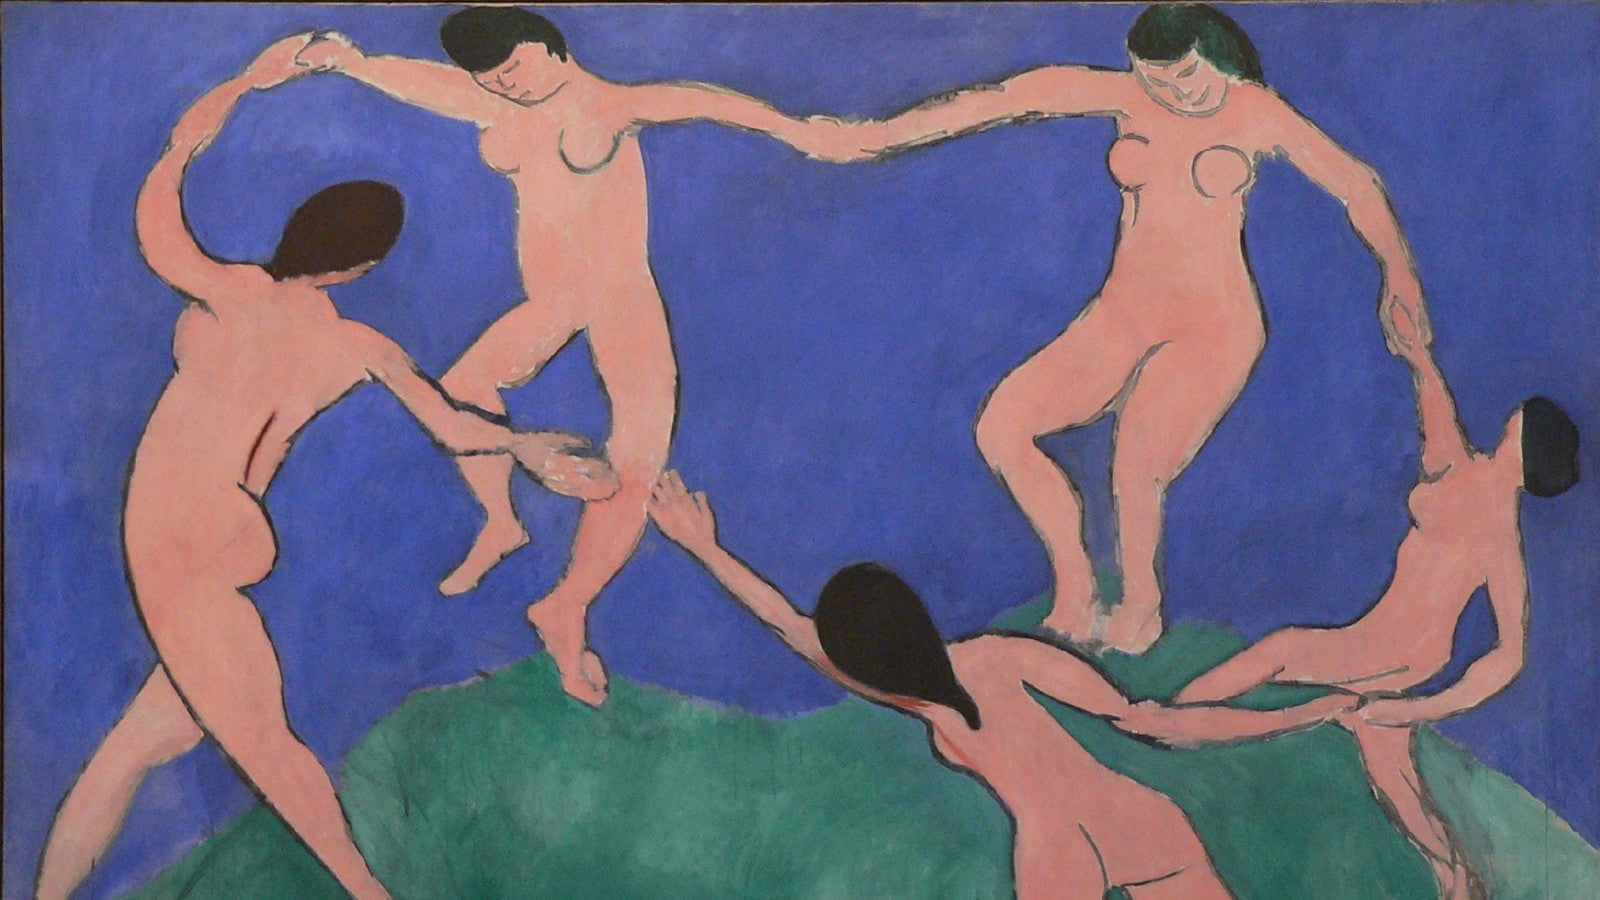 Dance (I) painting by Henri Matisse (1909)